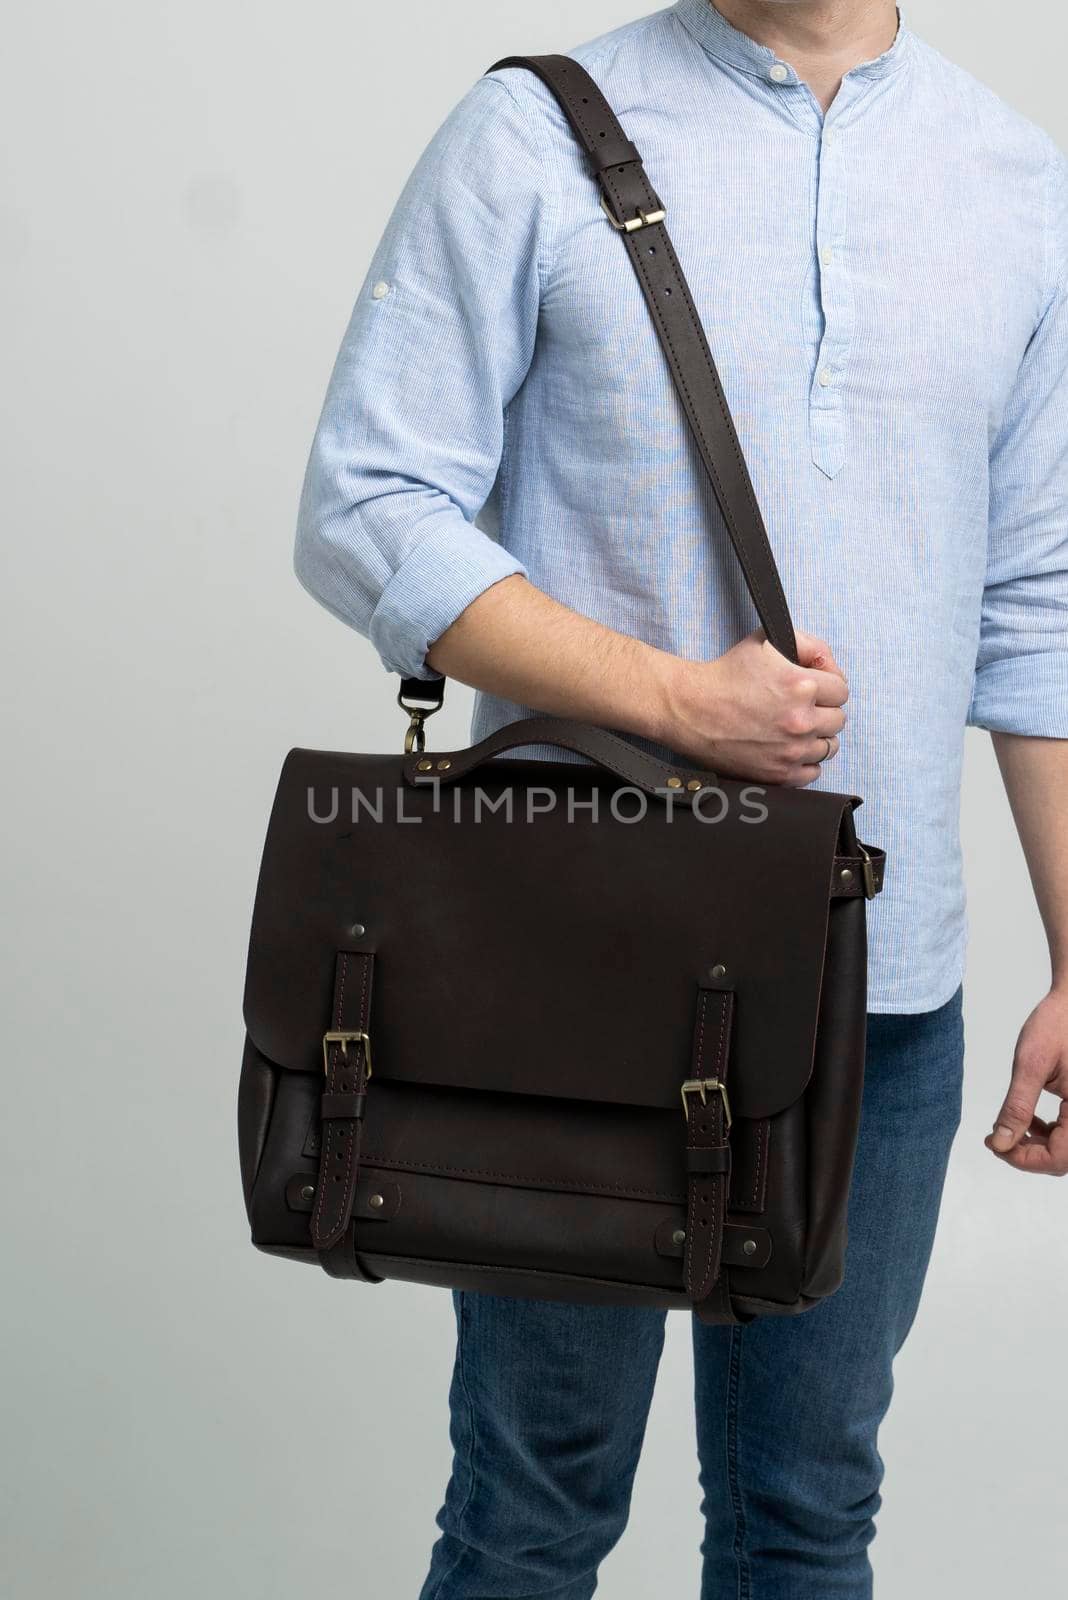 Brown men's shoulder leather bag for a documents and laptop on the shoulders of a man in a blue shirt and jeans with a white background. Satchel, mens leather handmade briefcase. by vovsht